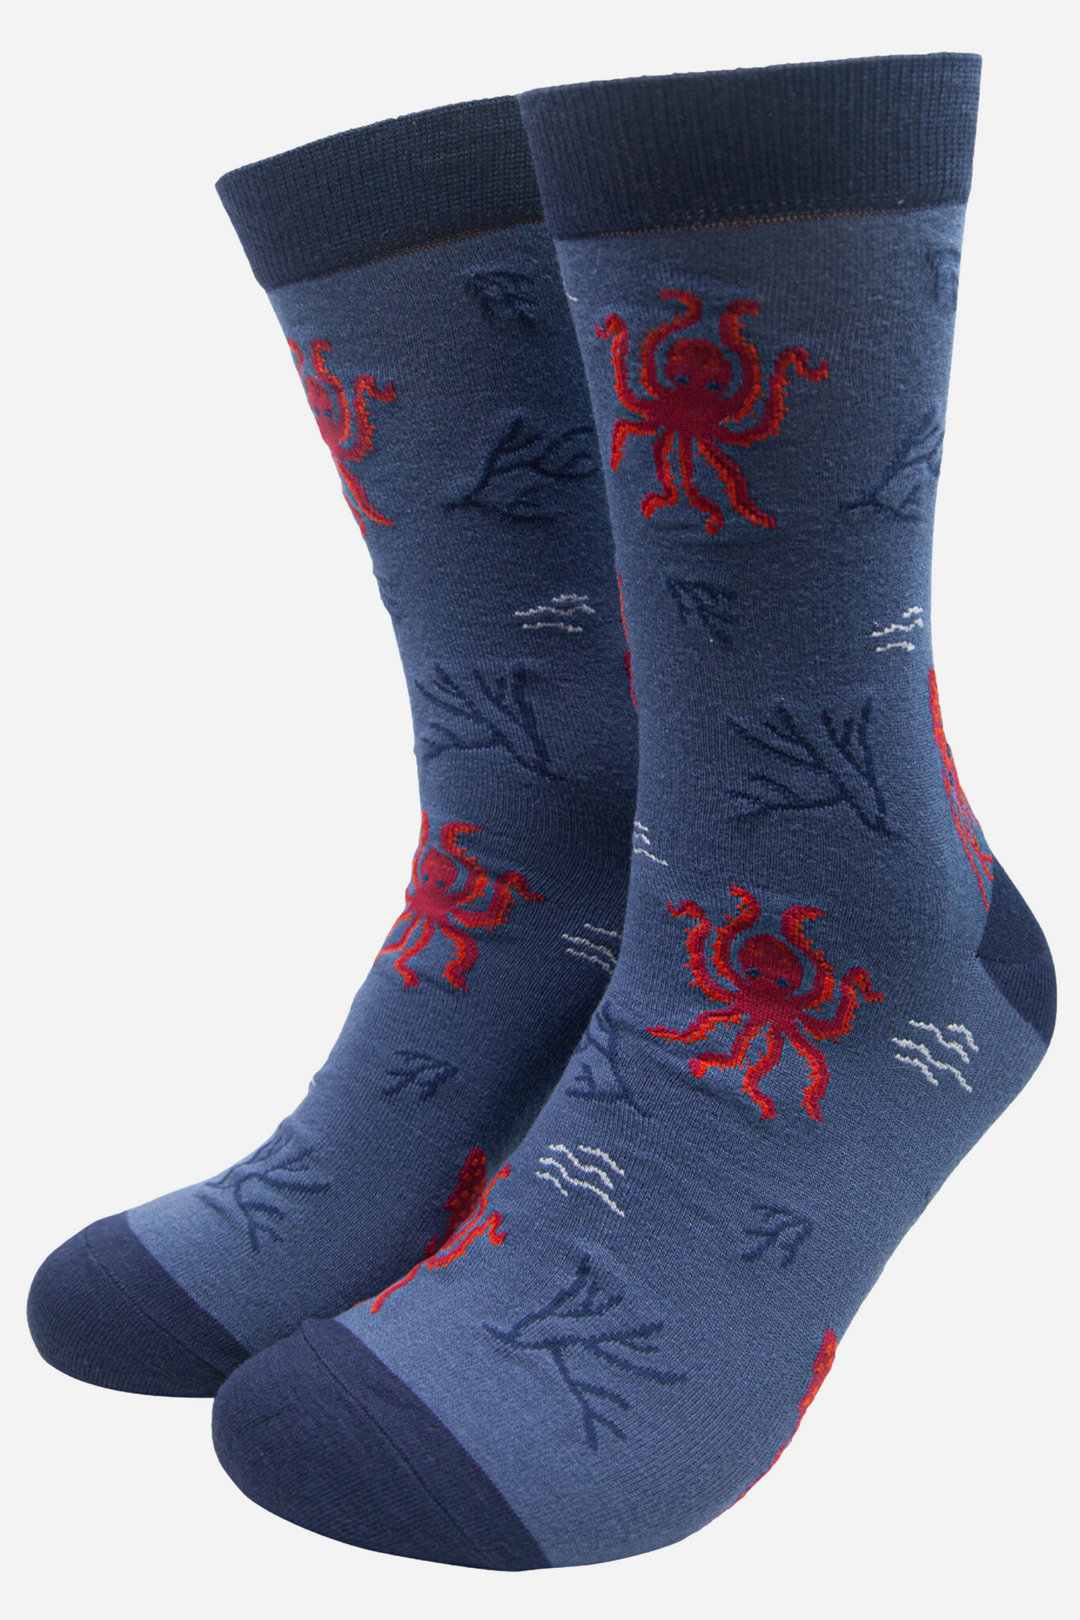 Blue Men's Squid and Octopus Print Bamboo Socks